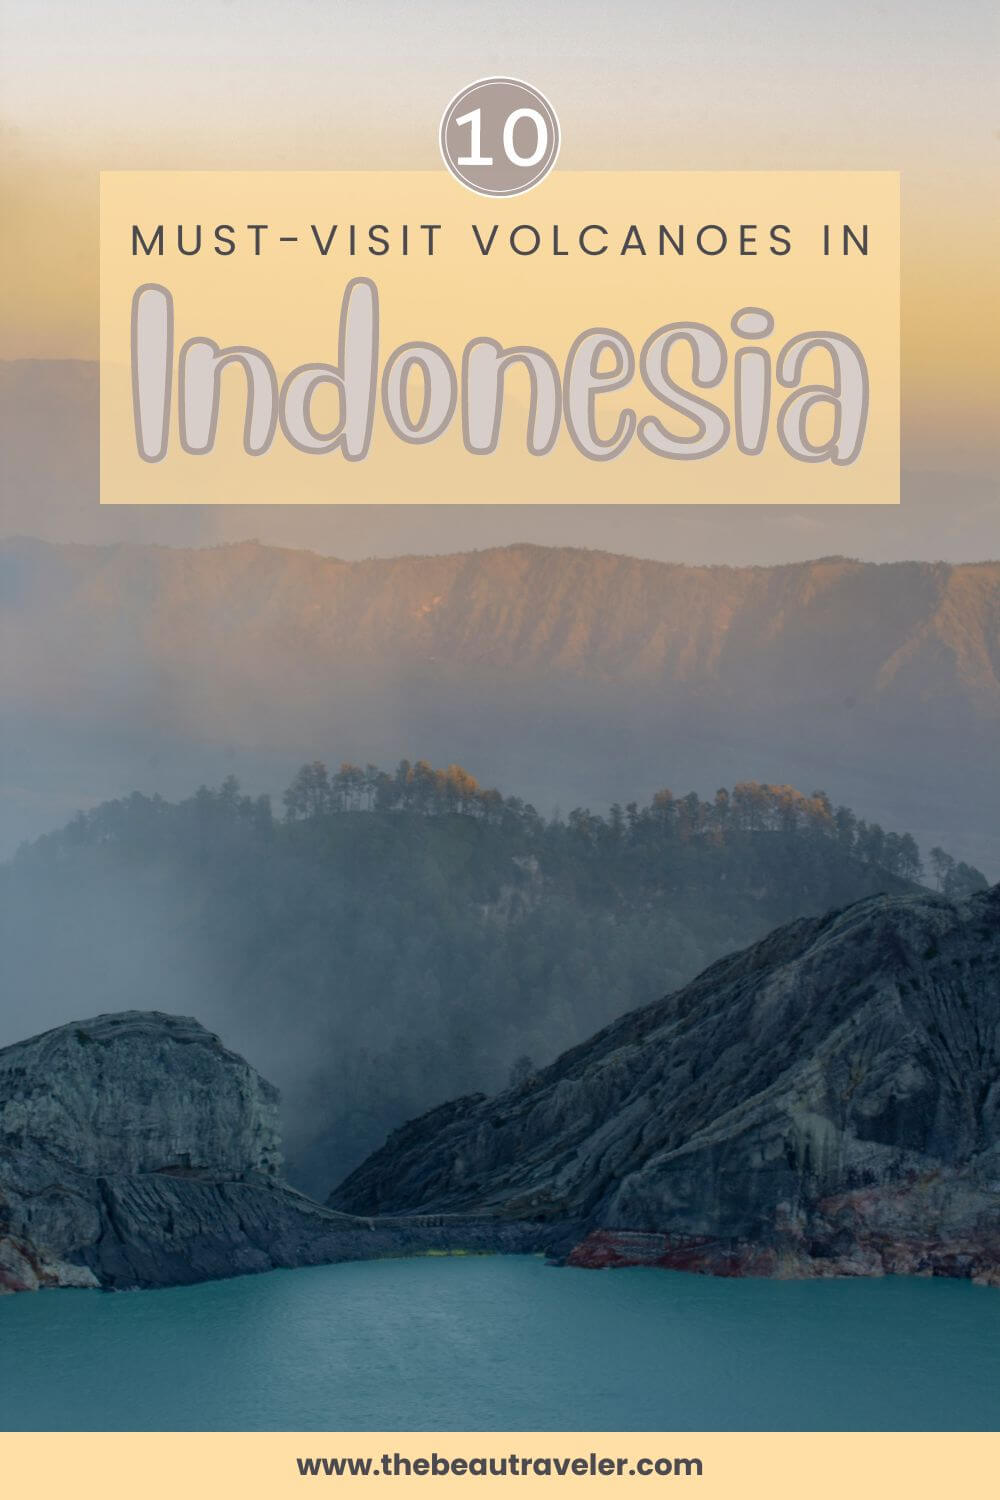 Top 10 Incredible Volcanoes to Visit in Indonesia - The BeauTraveler